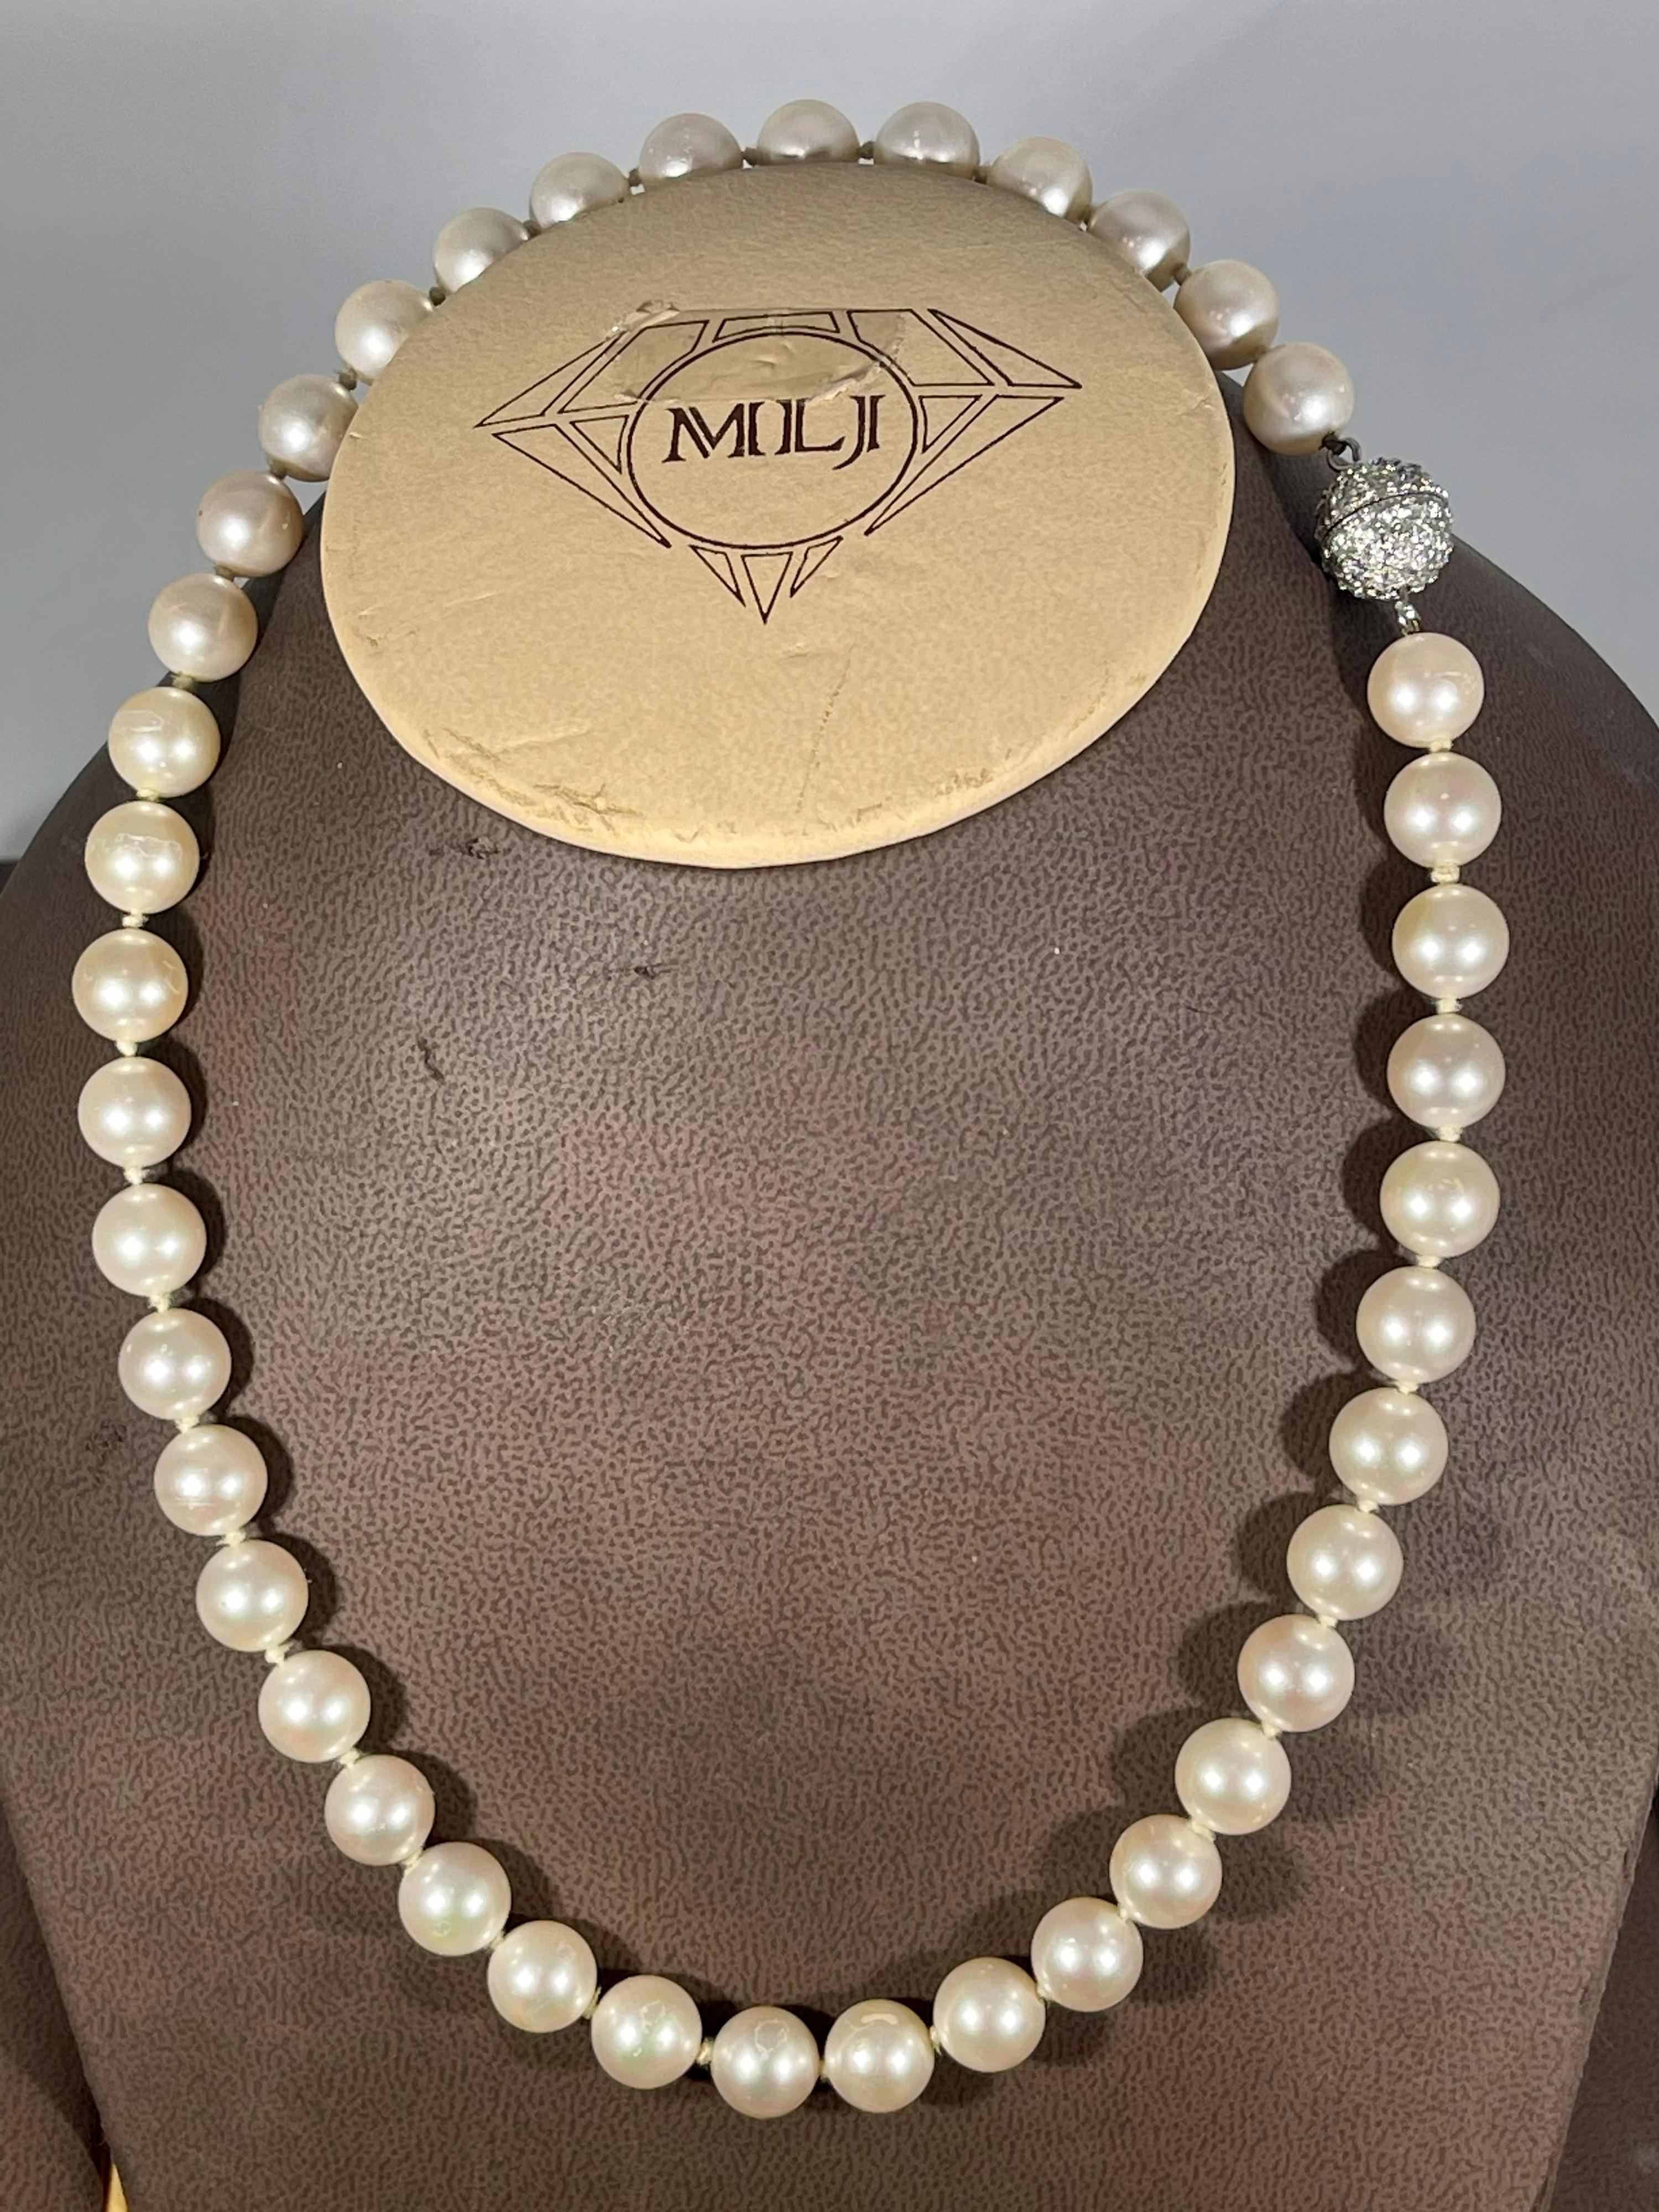 41 Round Akoya Pearls Strand Necklace Set in Metal Ball Clasp For Sale 2